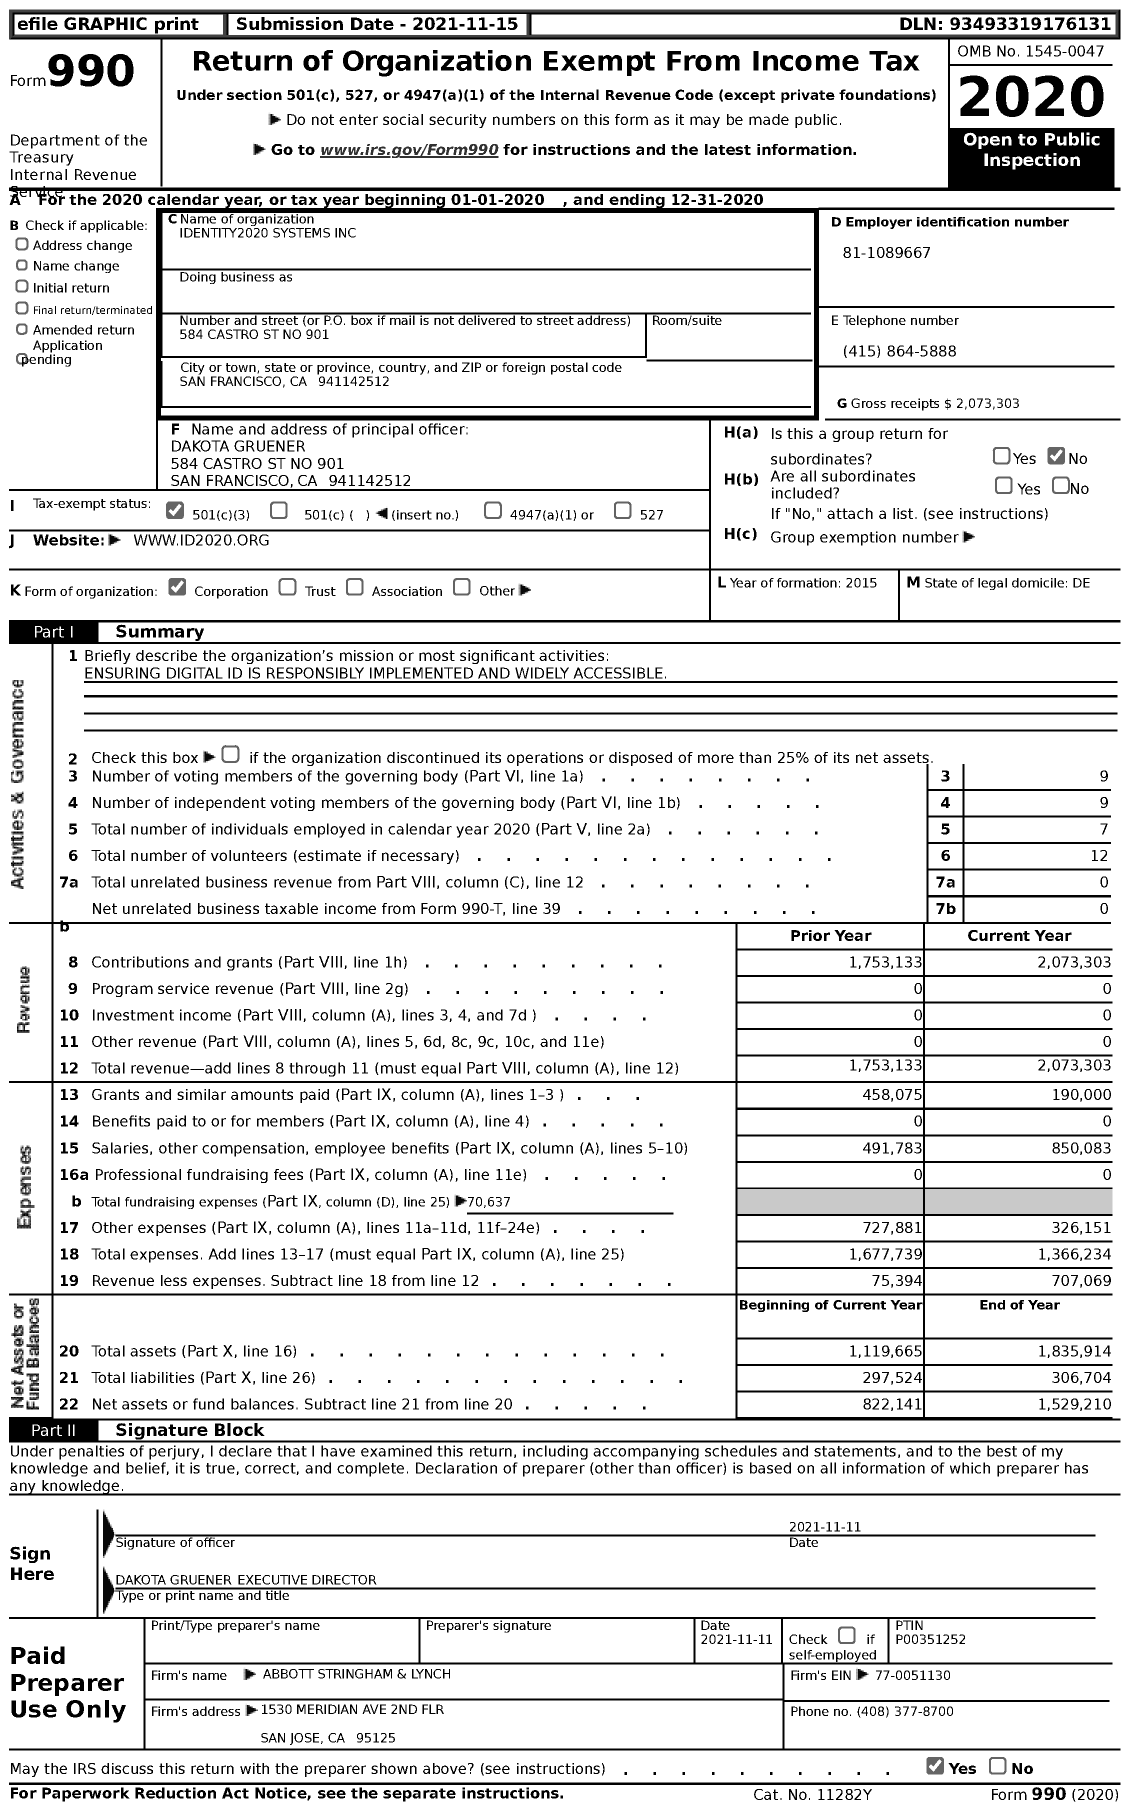 Image of first page of 2020 Form 990 for Identity2020 Systems